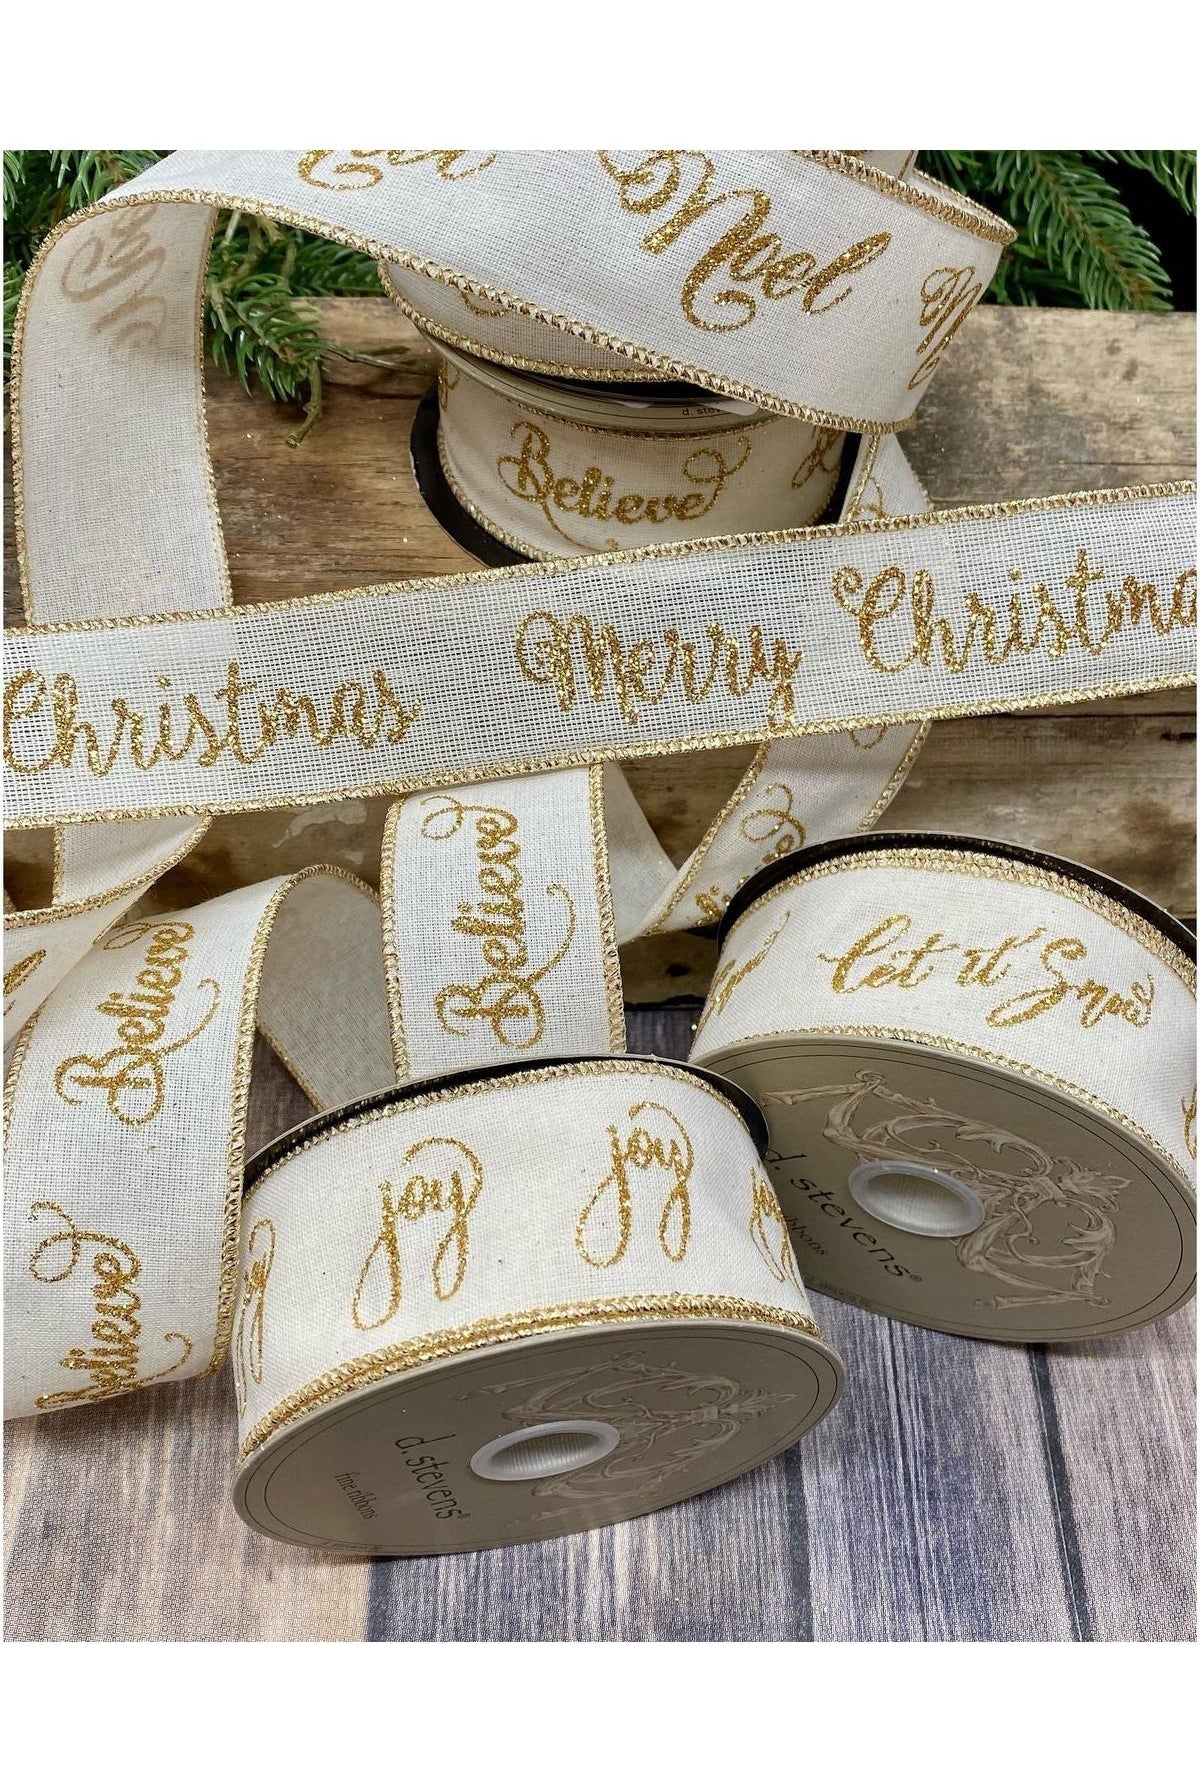 Shop For 1.5" Cotton Linen Believe Ribbon: Ivory/Gold (10 Yards) 15-7818